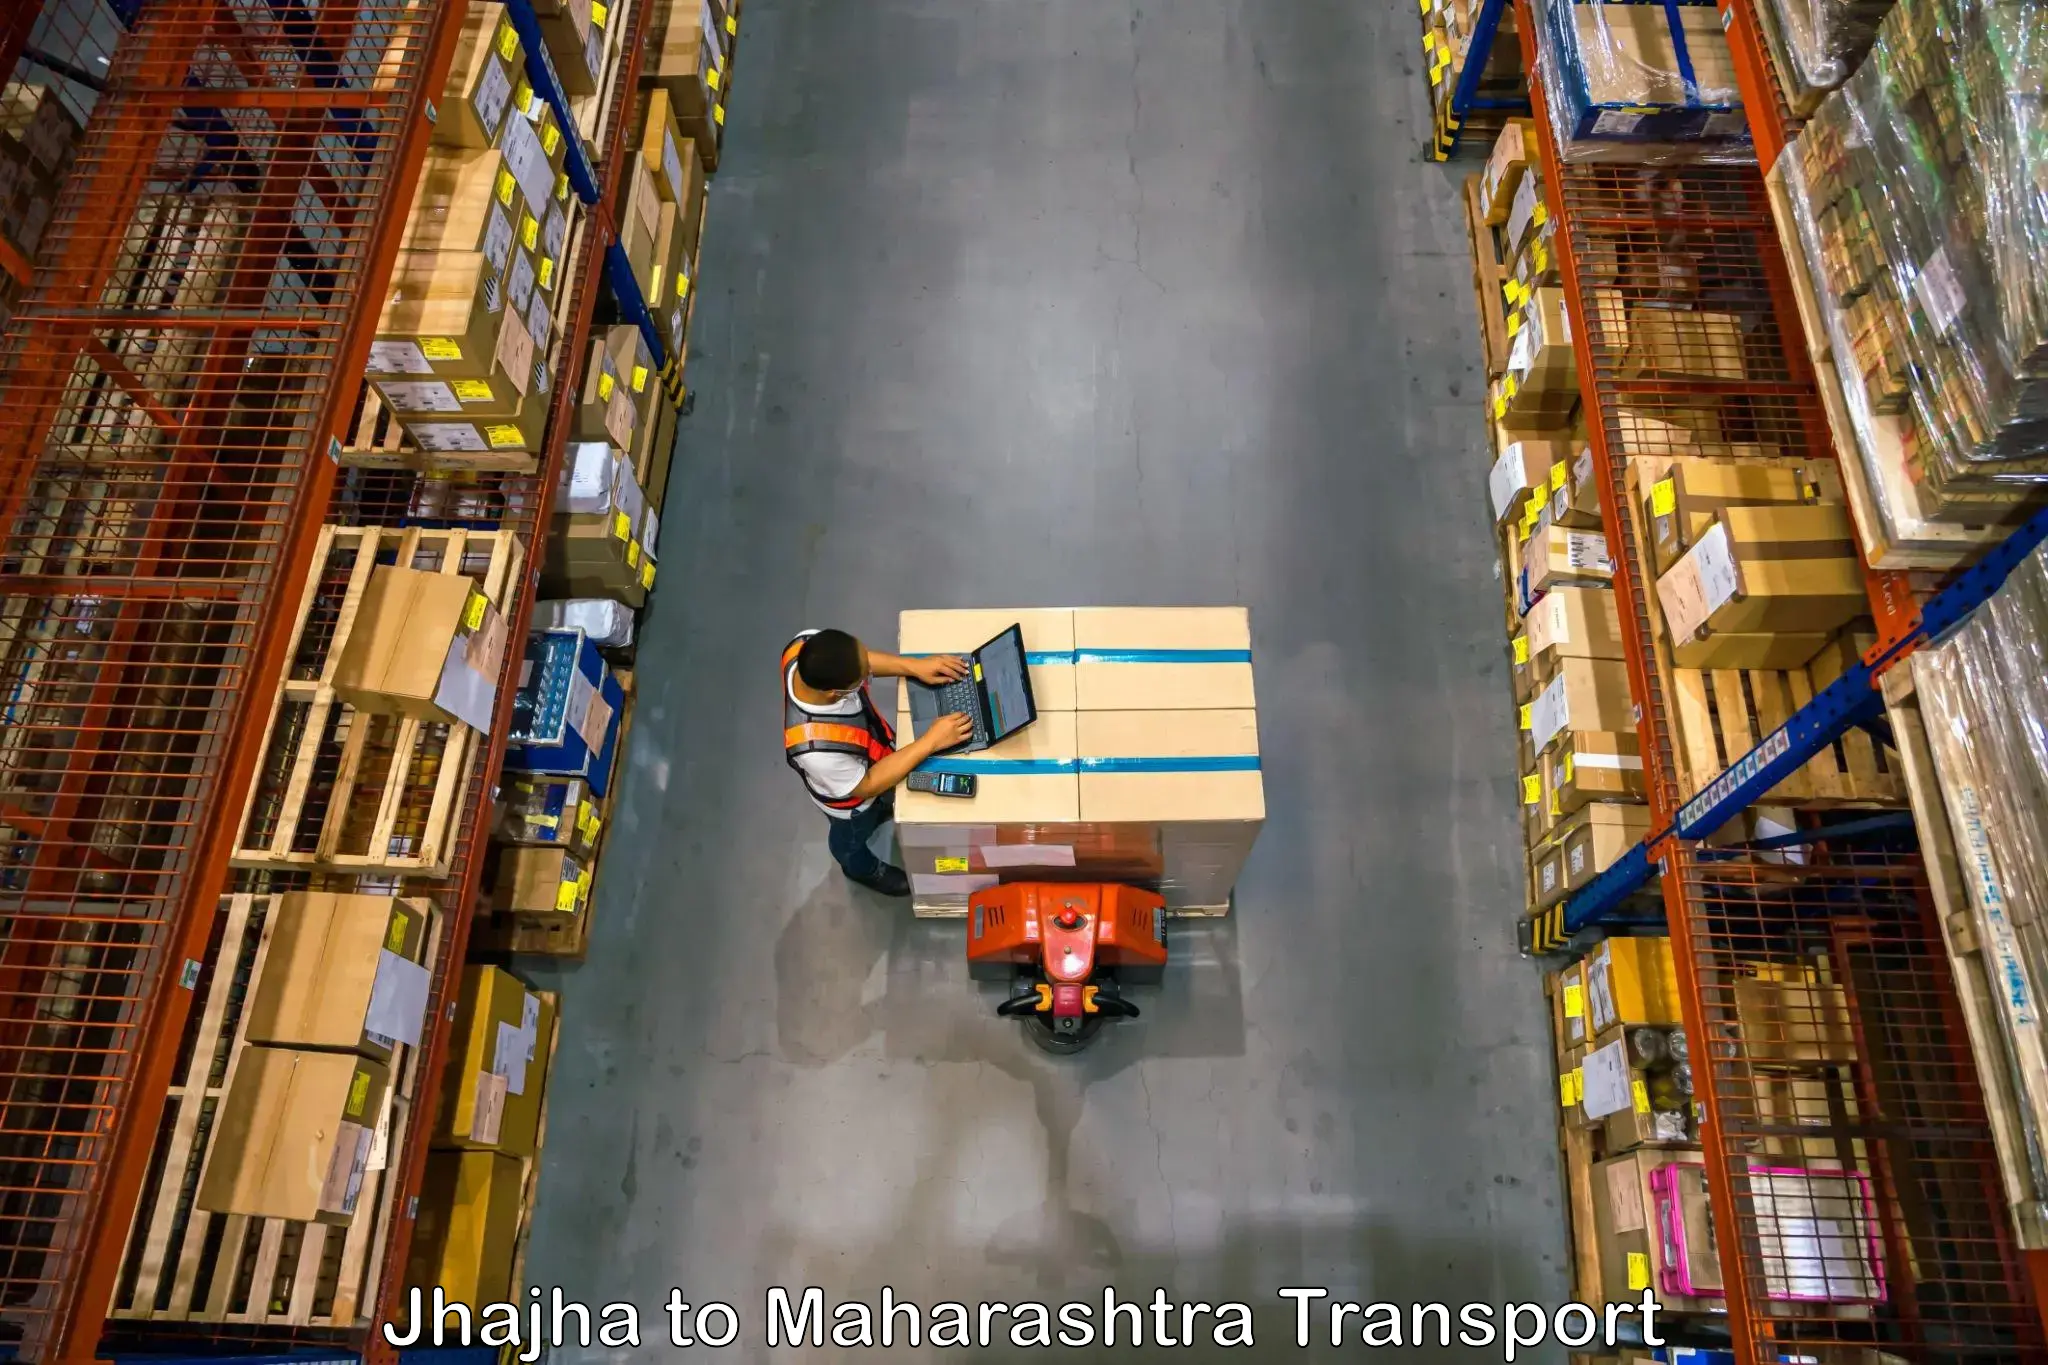 Express transport services in Jhajha to Shevgaon